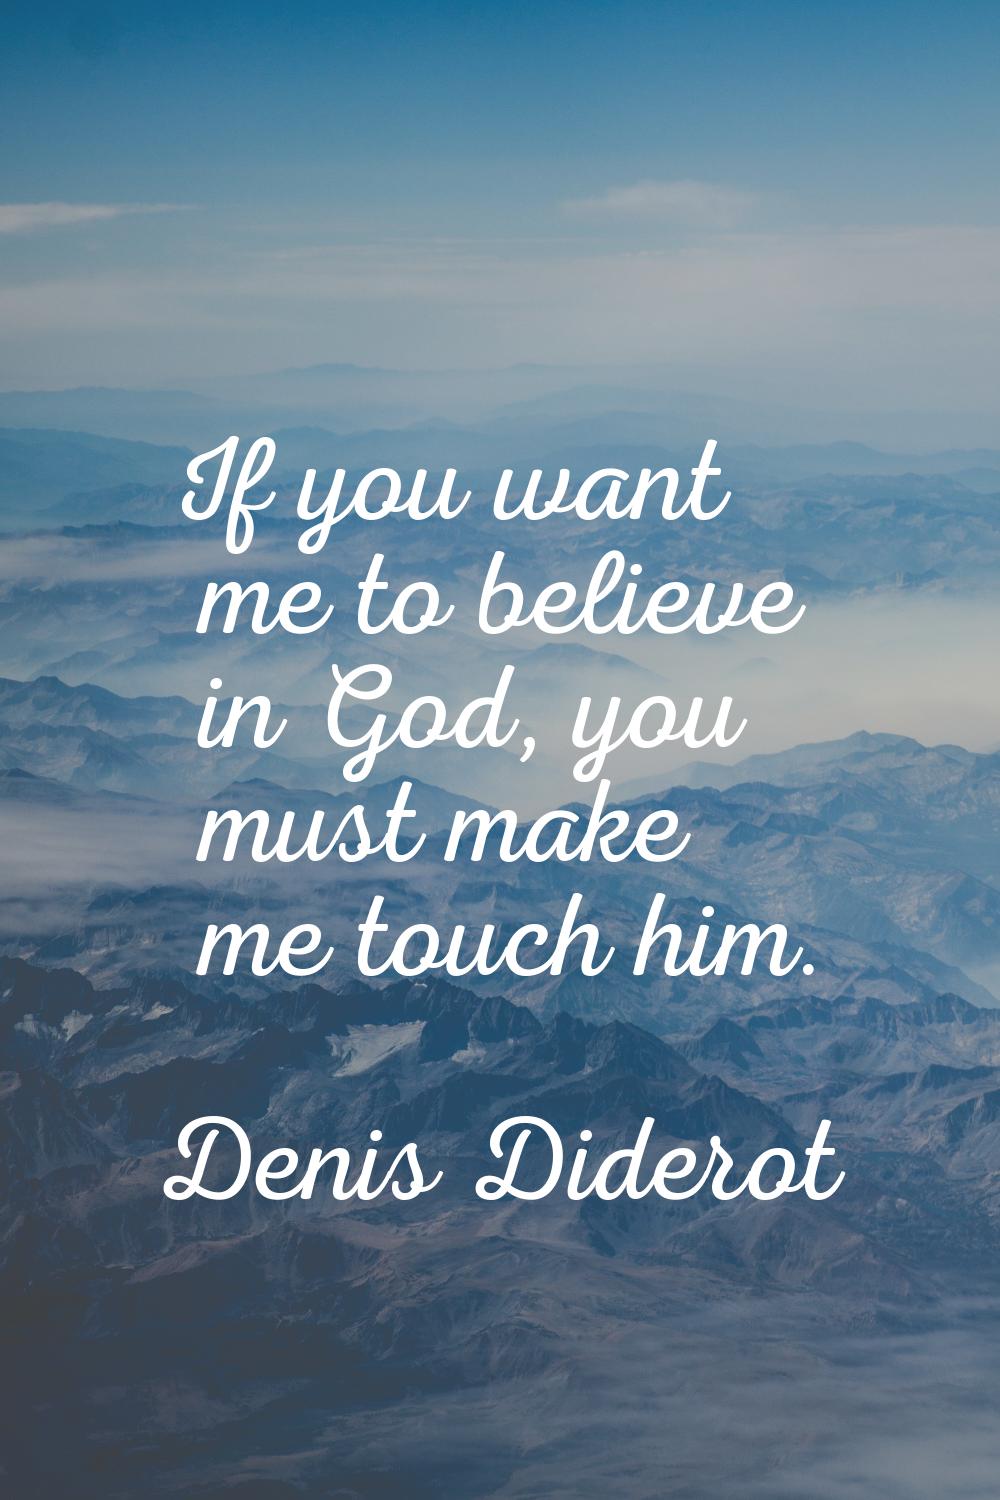 If you want me to believe in God, you must make me touch him.